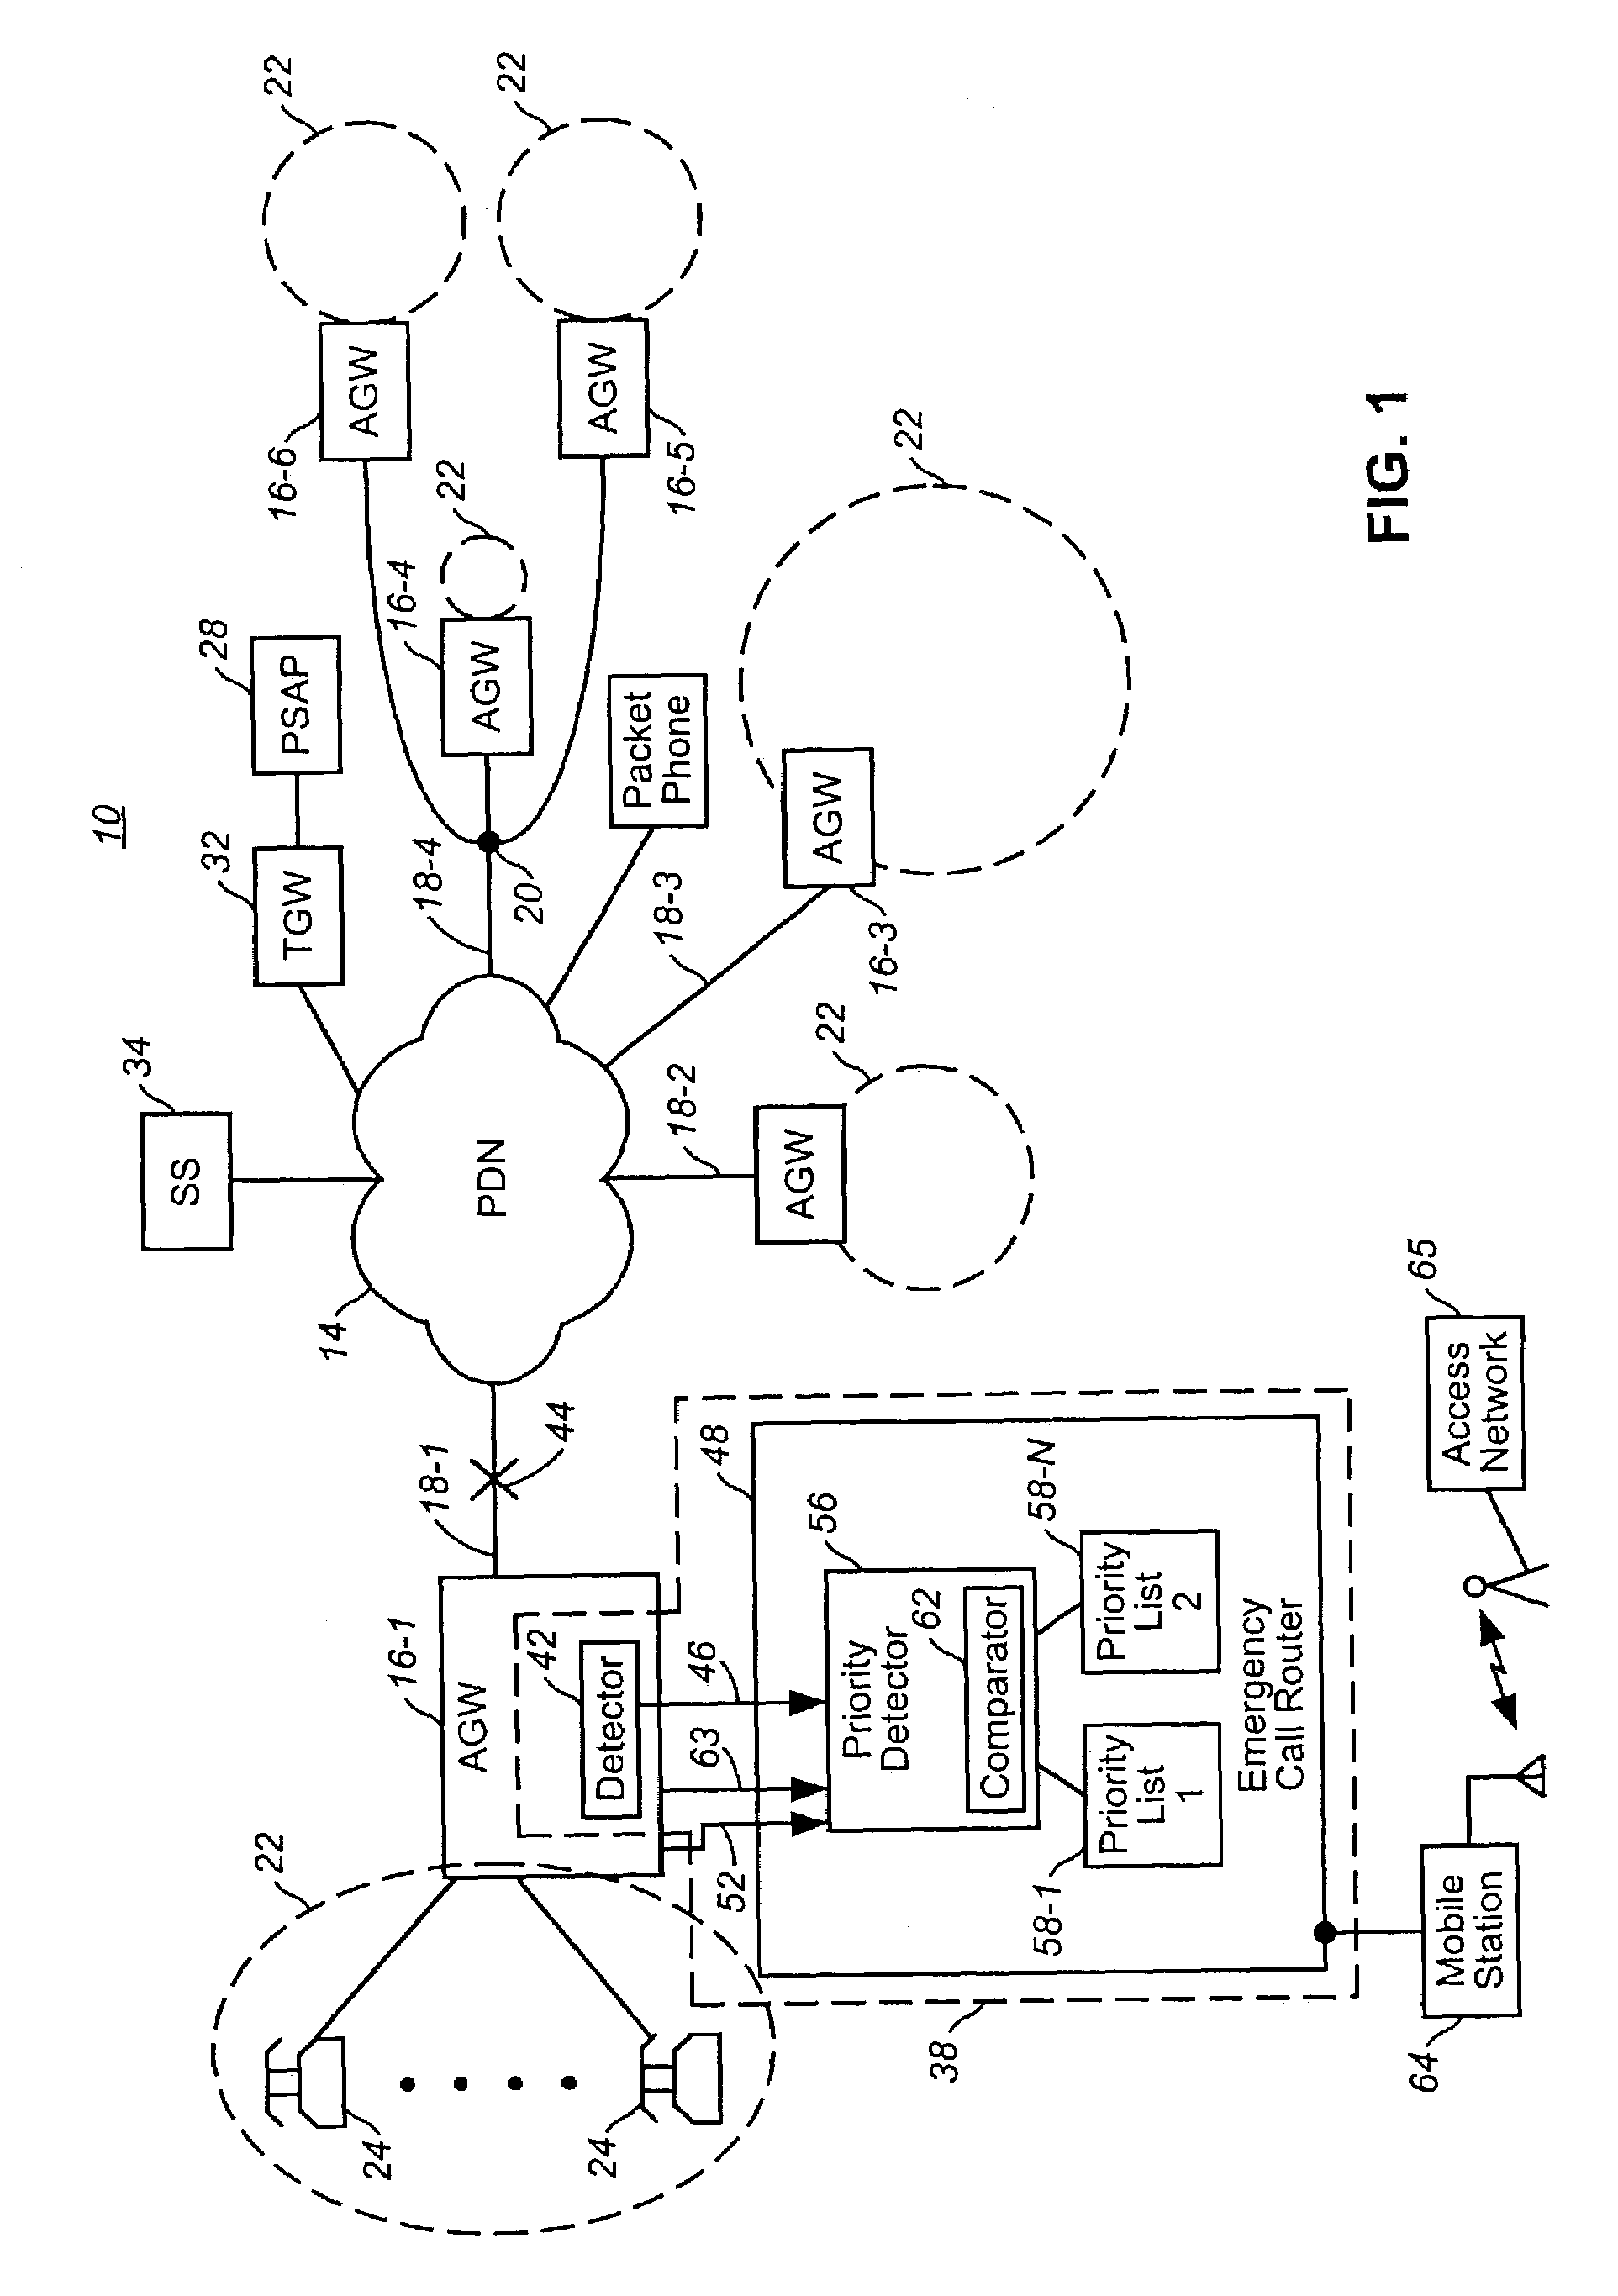 Call-routing apparatus, and associated method, for providing local call handling functions in a communication network